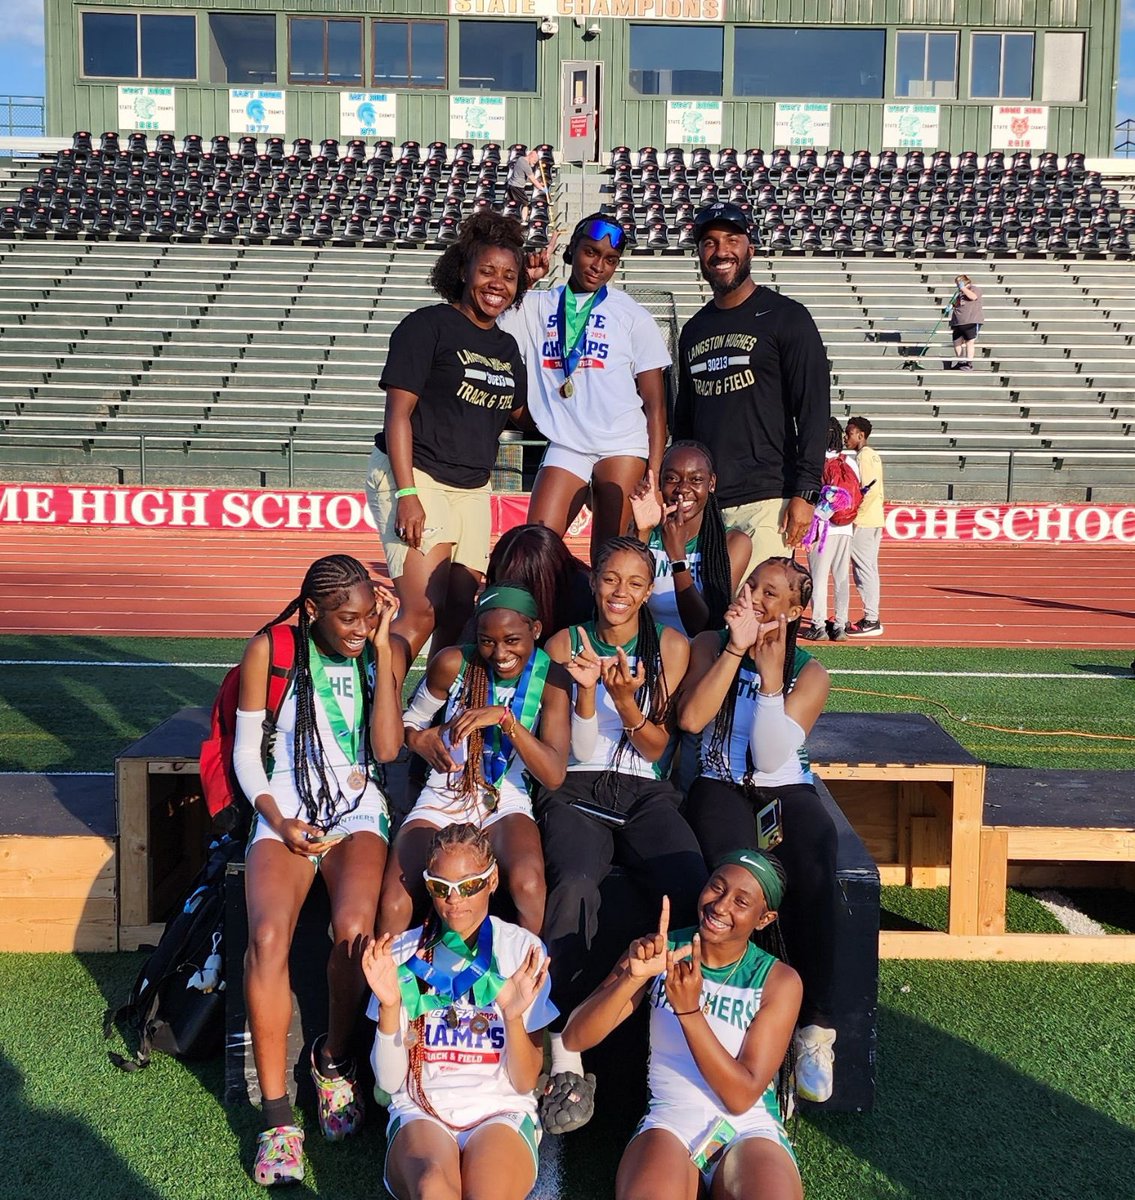 Boys: Back to Back State Champs Girls: 7th overall in 6A The continual growth of this program is amazing & I’m blessed to be apart of it! @wcann33 @LHughesSports @ps_nation_ @MilesplitGA @Justin_FOX5 @MinorityTFXCGA